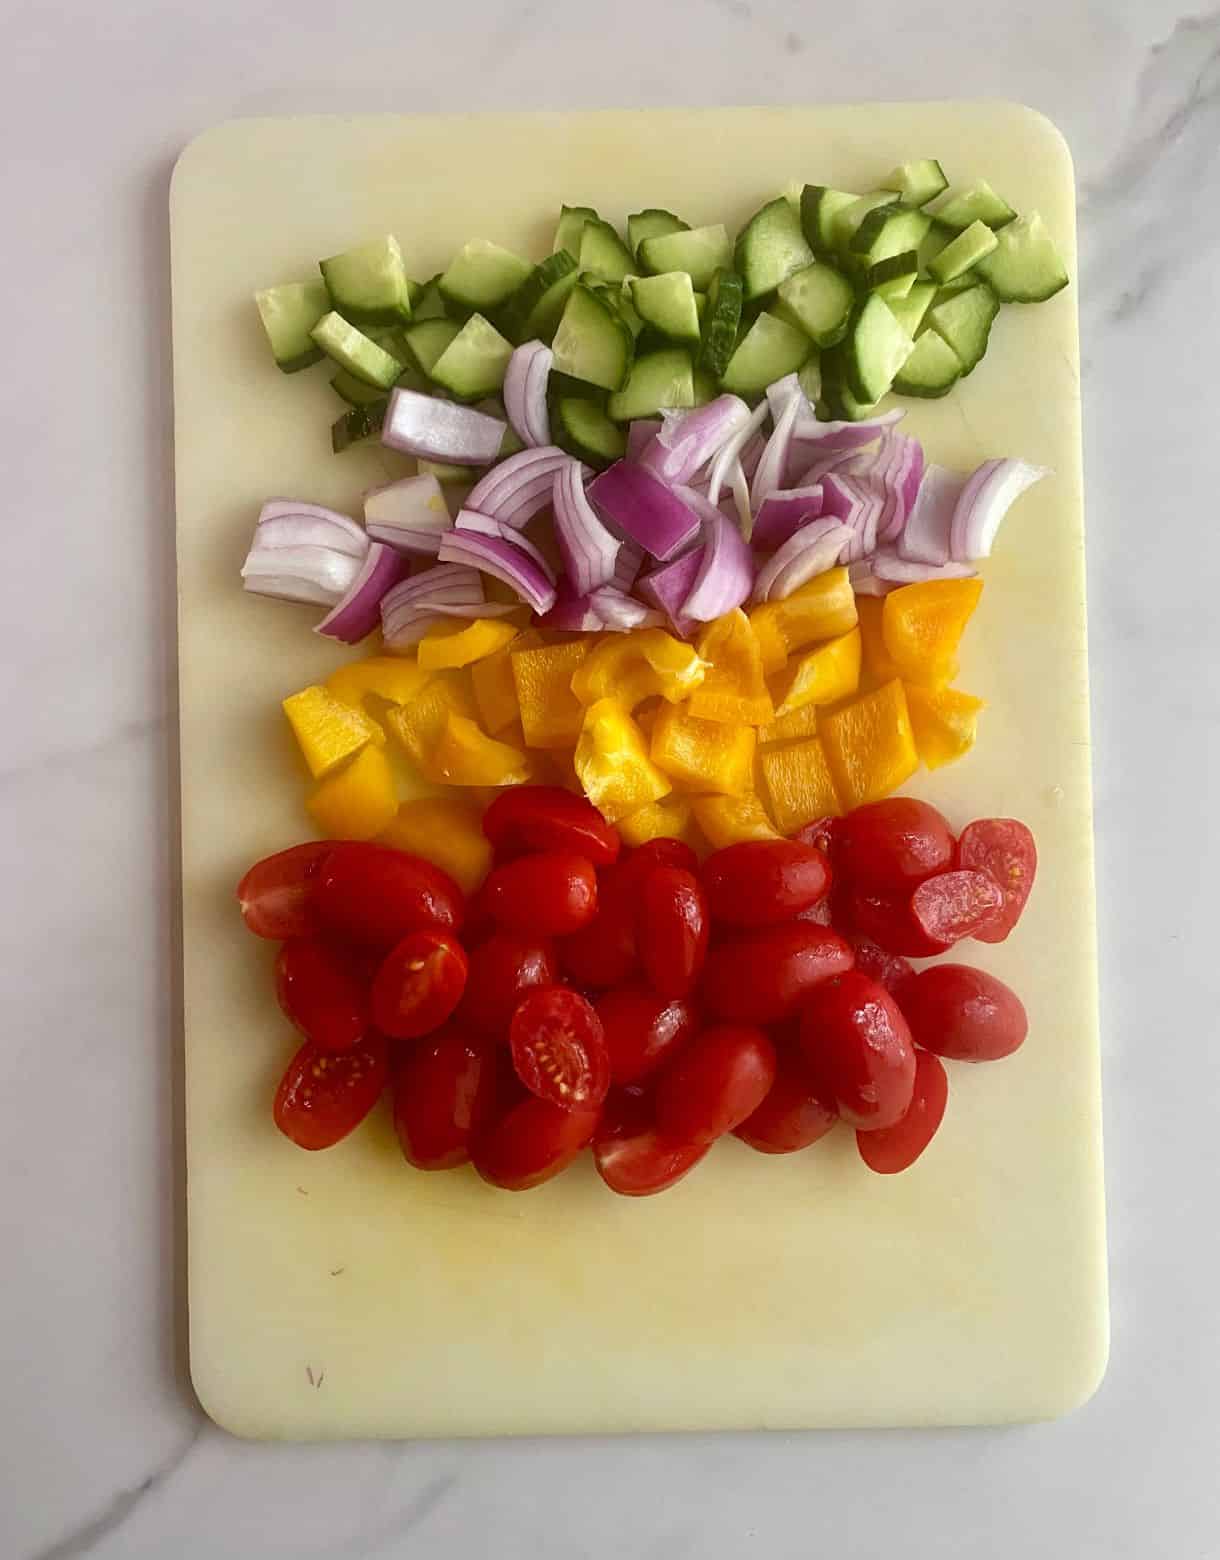 A cutting board with diced cucumbers, red onion, bell pepper and halved tomatoes.